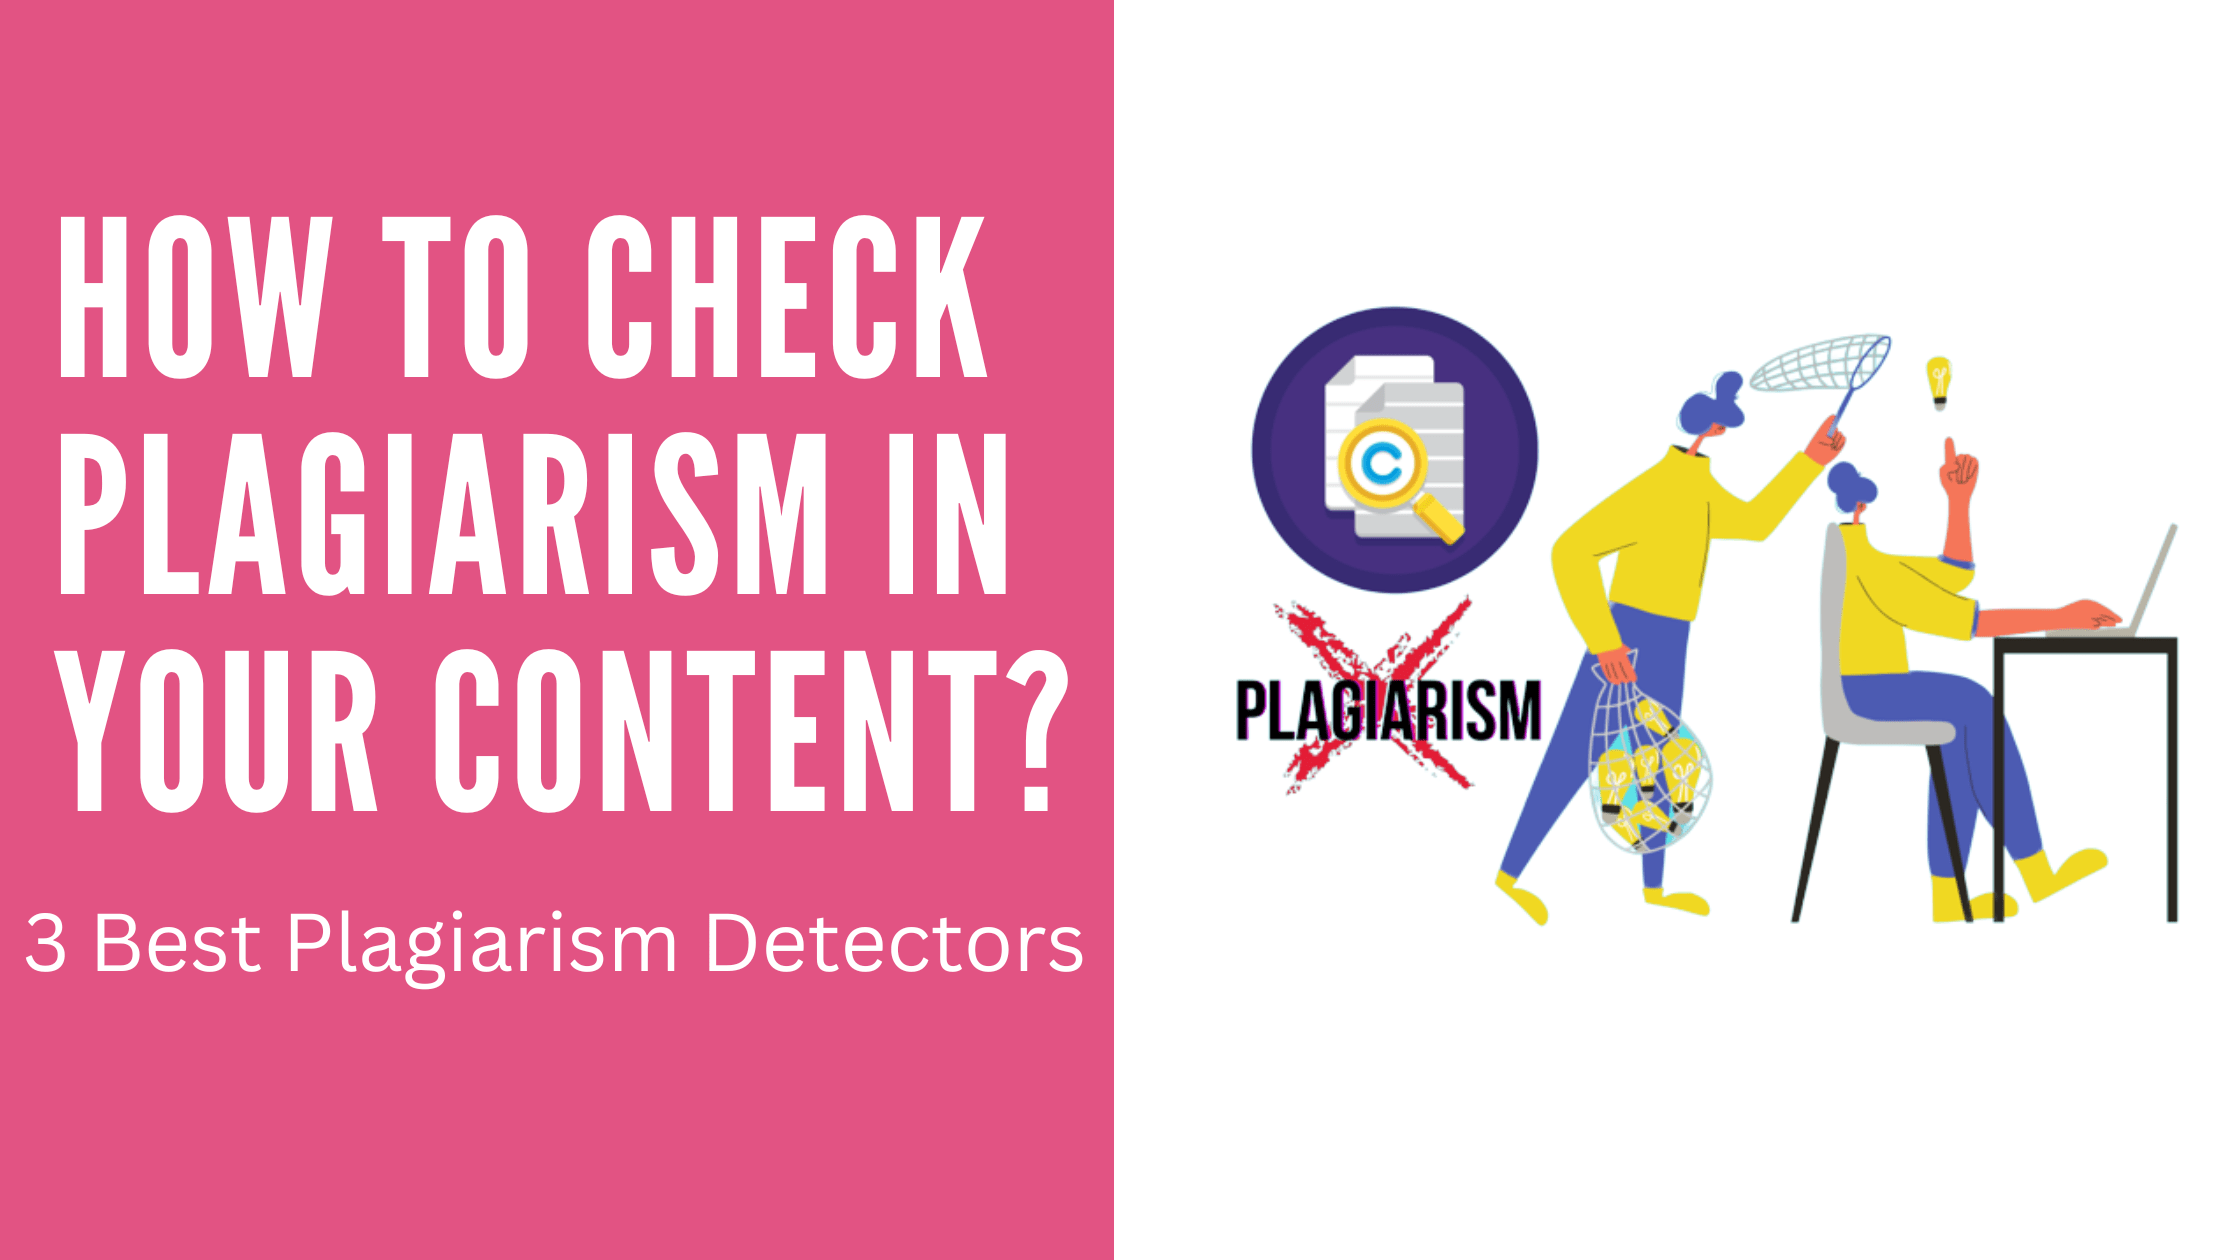 How to Check Plagiarism In Your Content?